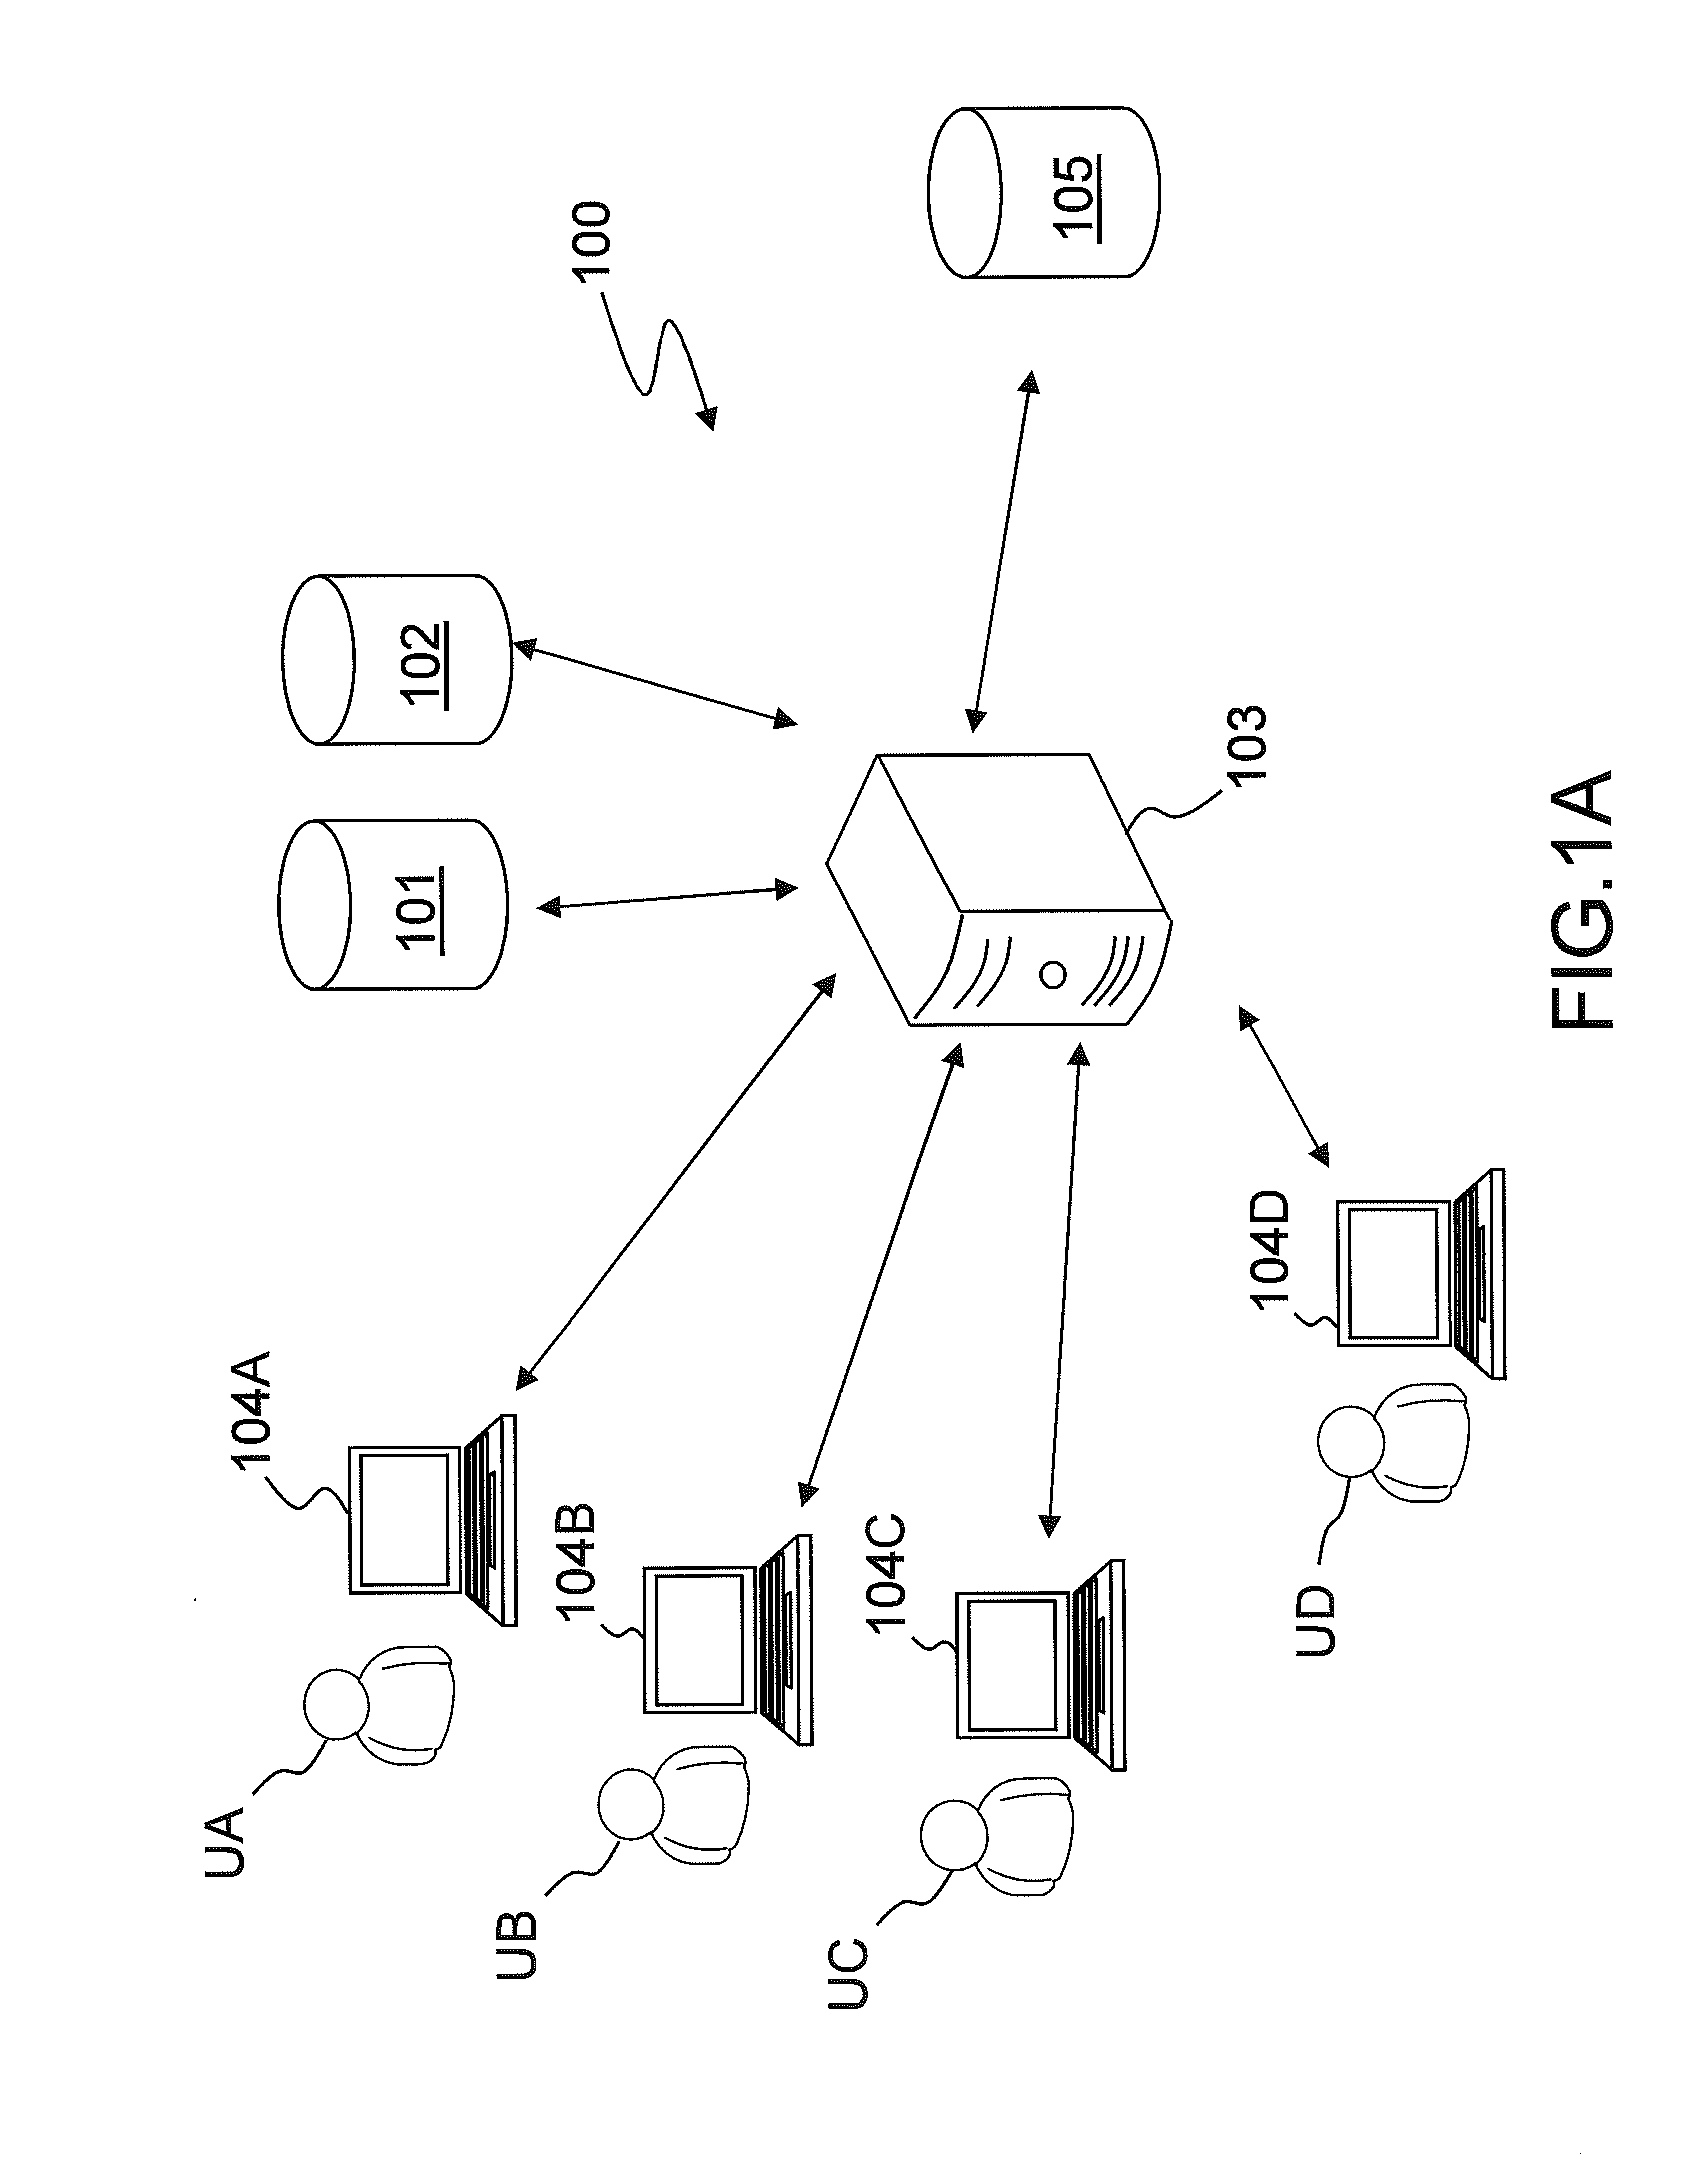 Collaborative generation of configuration technical data for a product to be manufactured